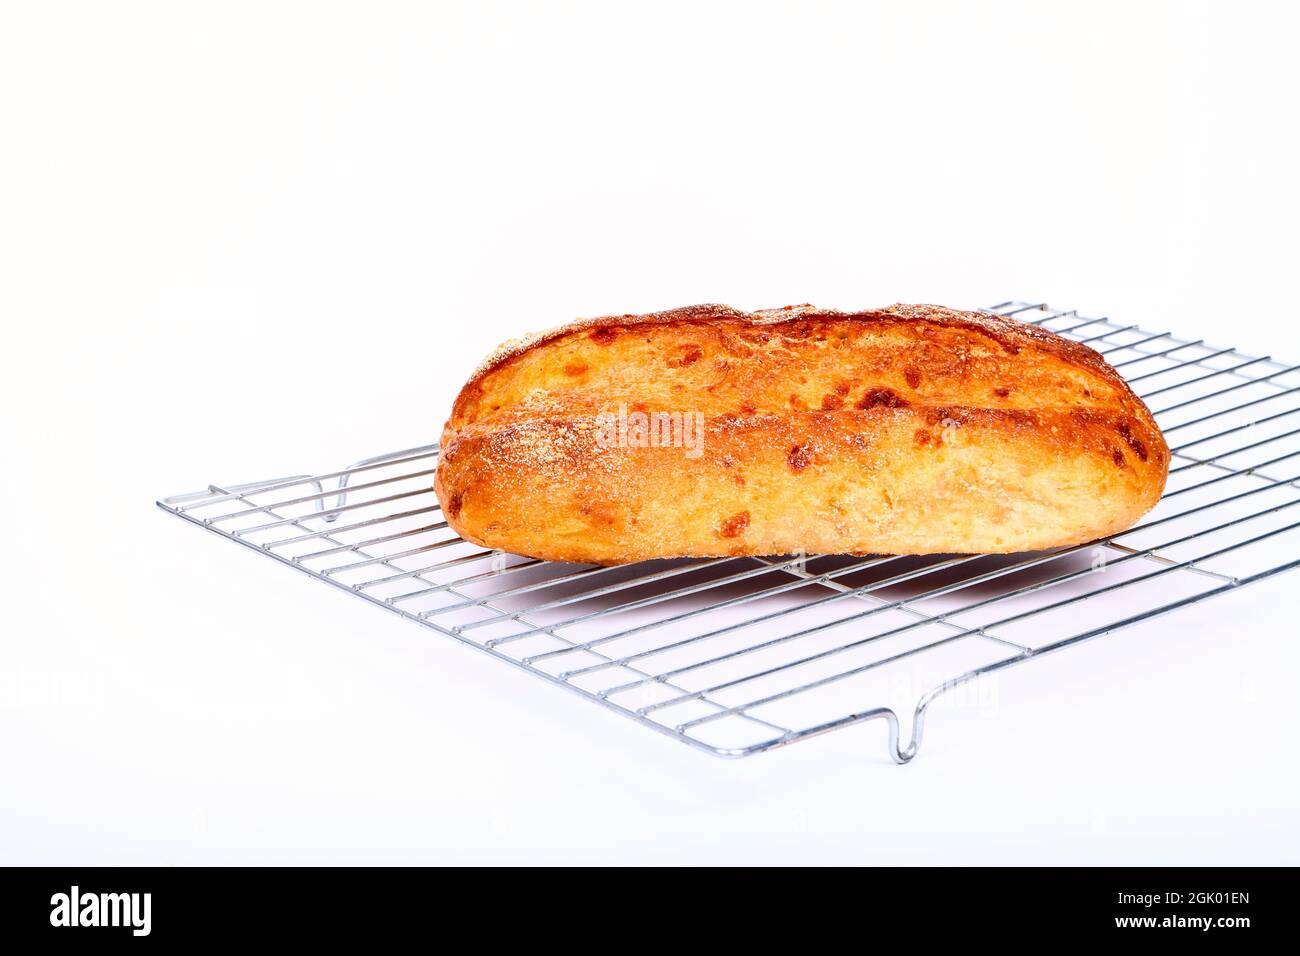 Freshly baked sourdough and cheese artisan bread laid on a wire metal cooling rack Stock Photo